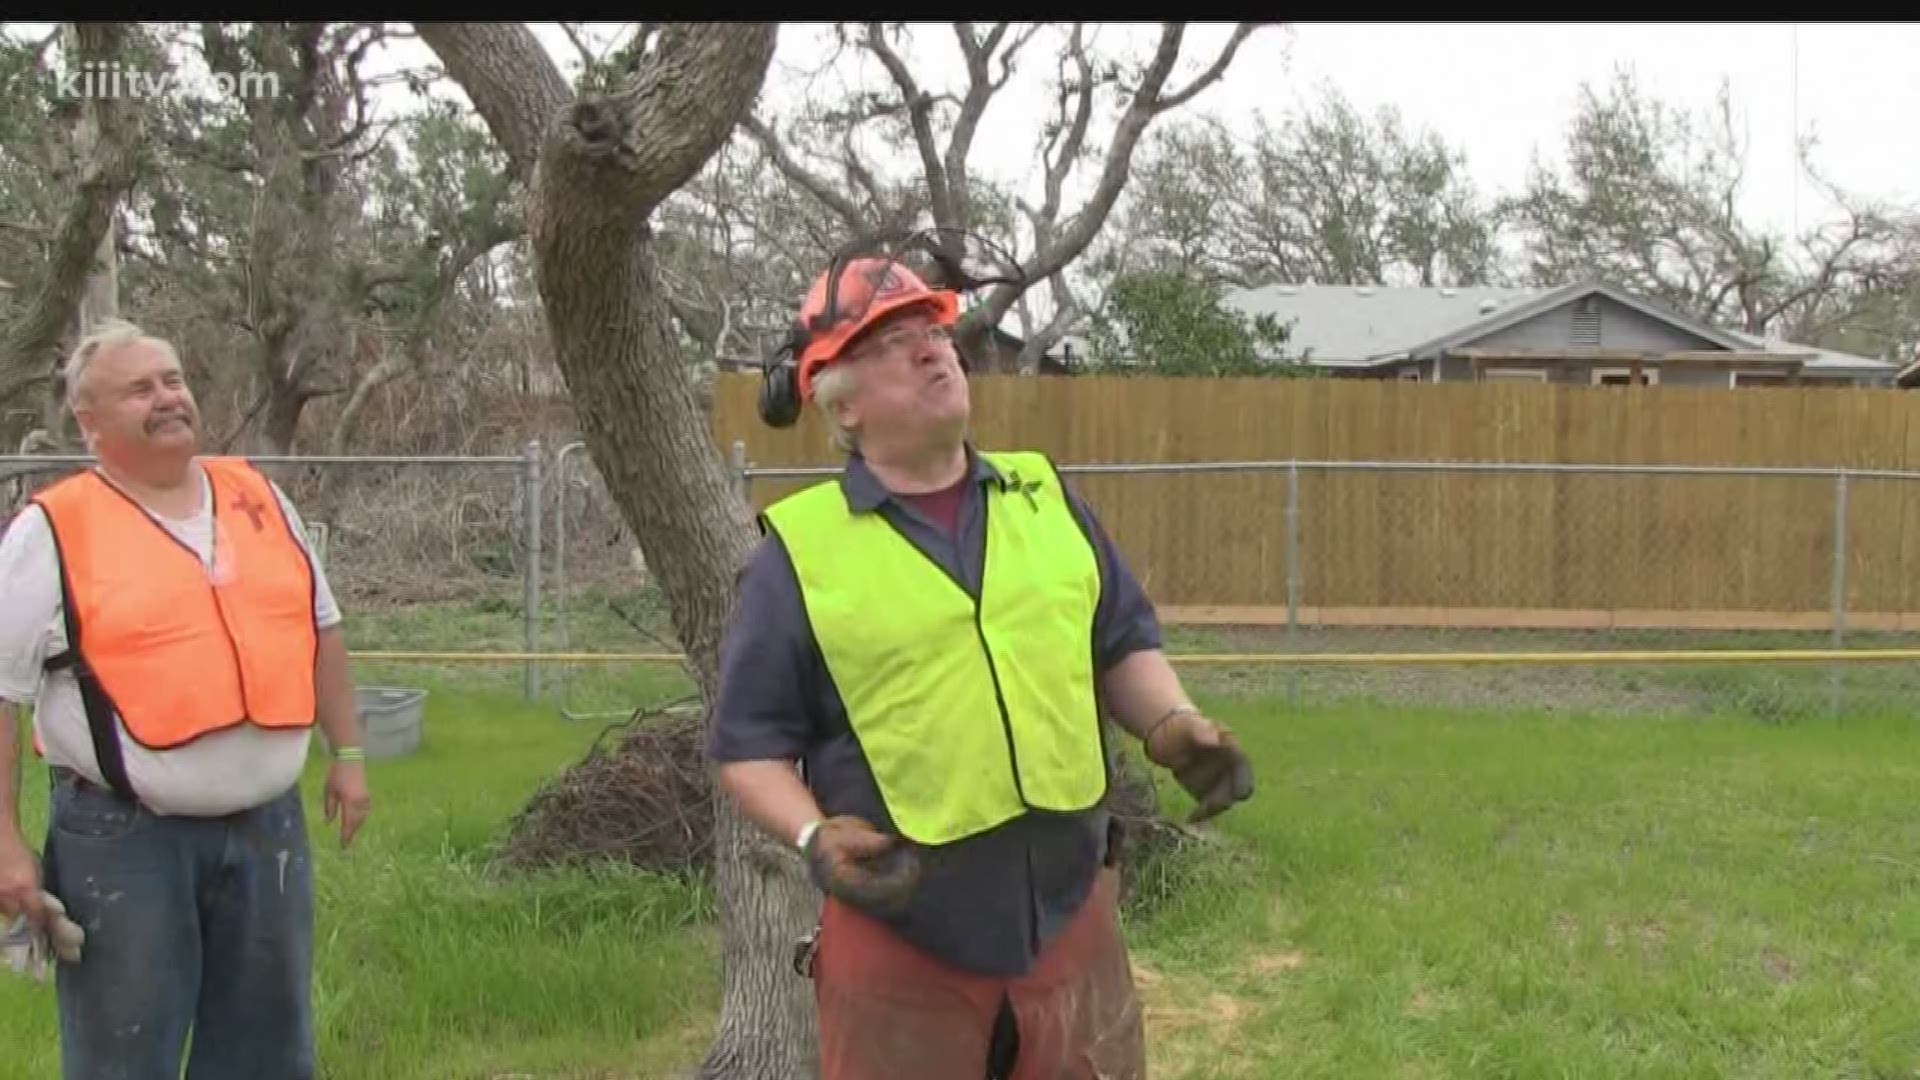 Pastor Ben Brashier is a disaster specialist who helps survivors of natural disasters, and he's made several trips to the coastal bend to do his part in the recovery process.